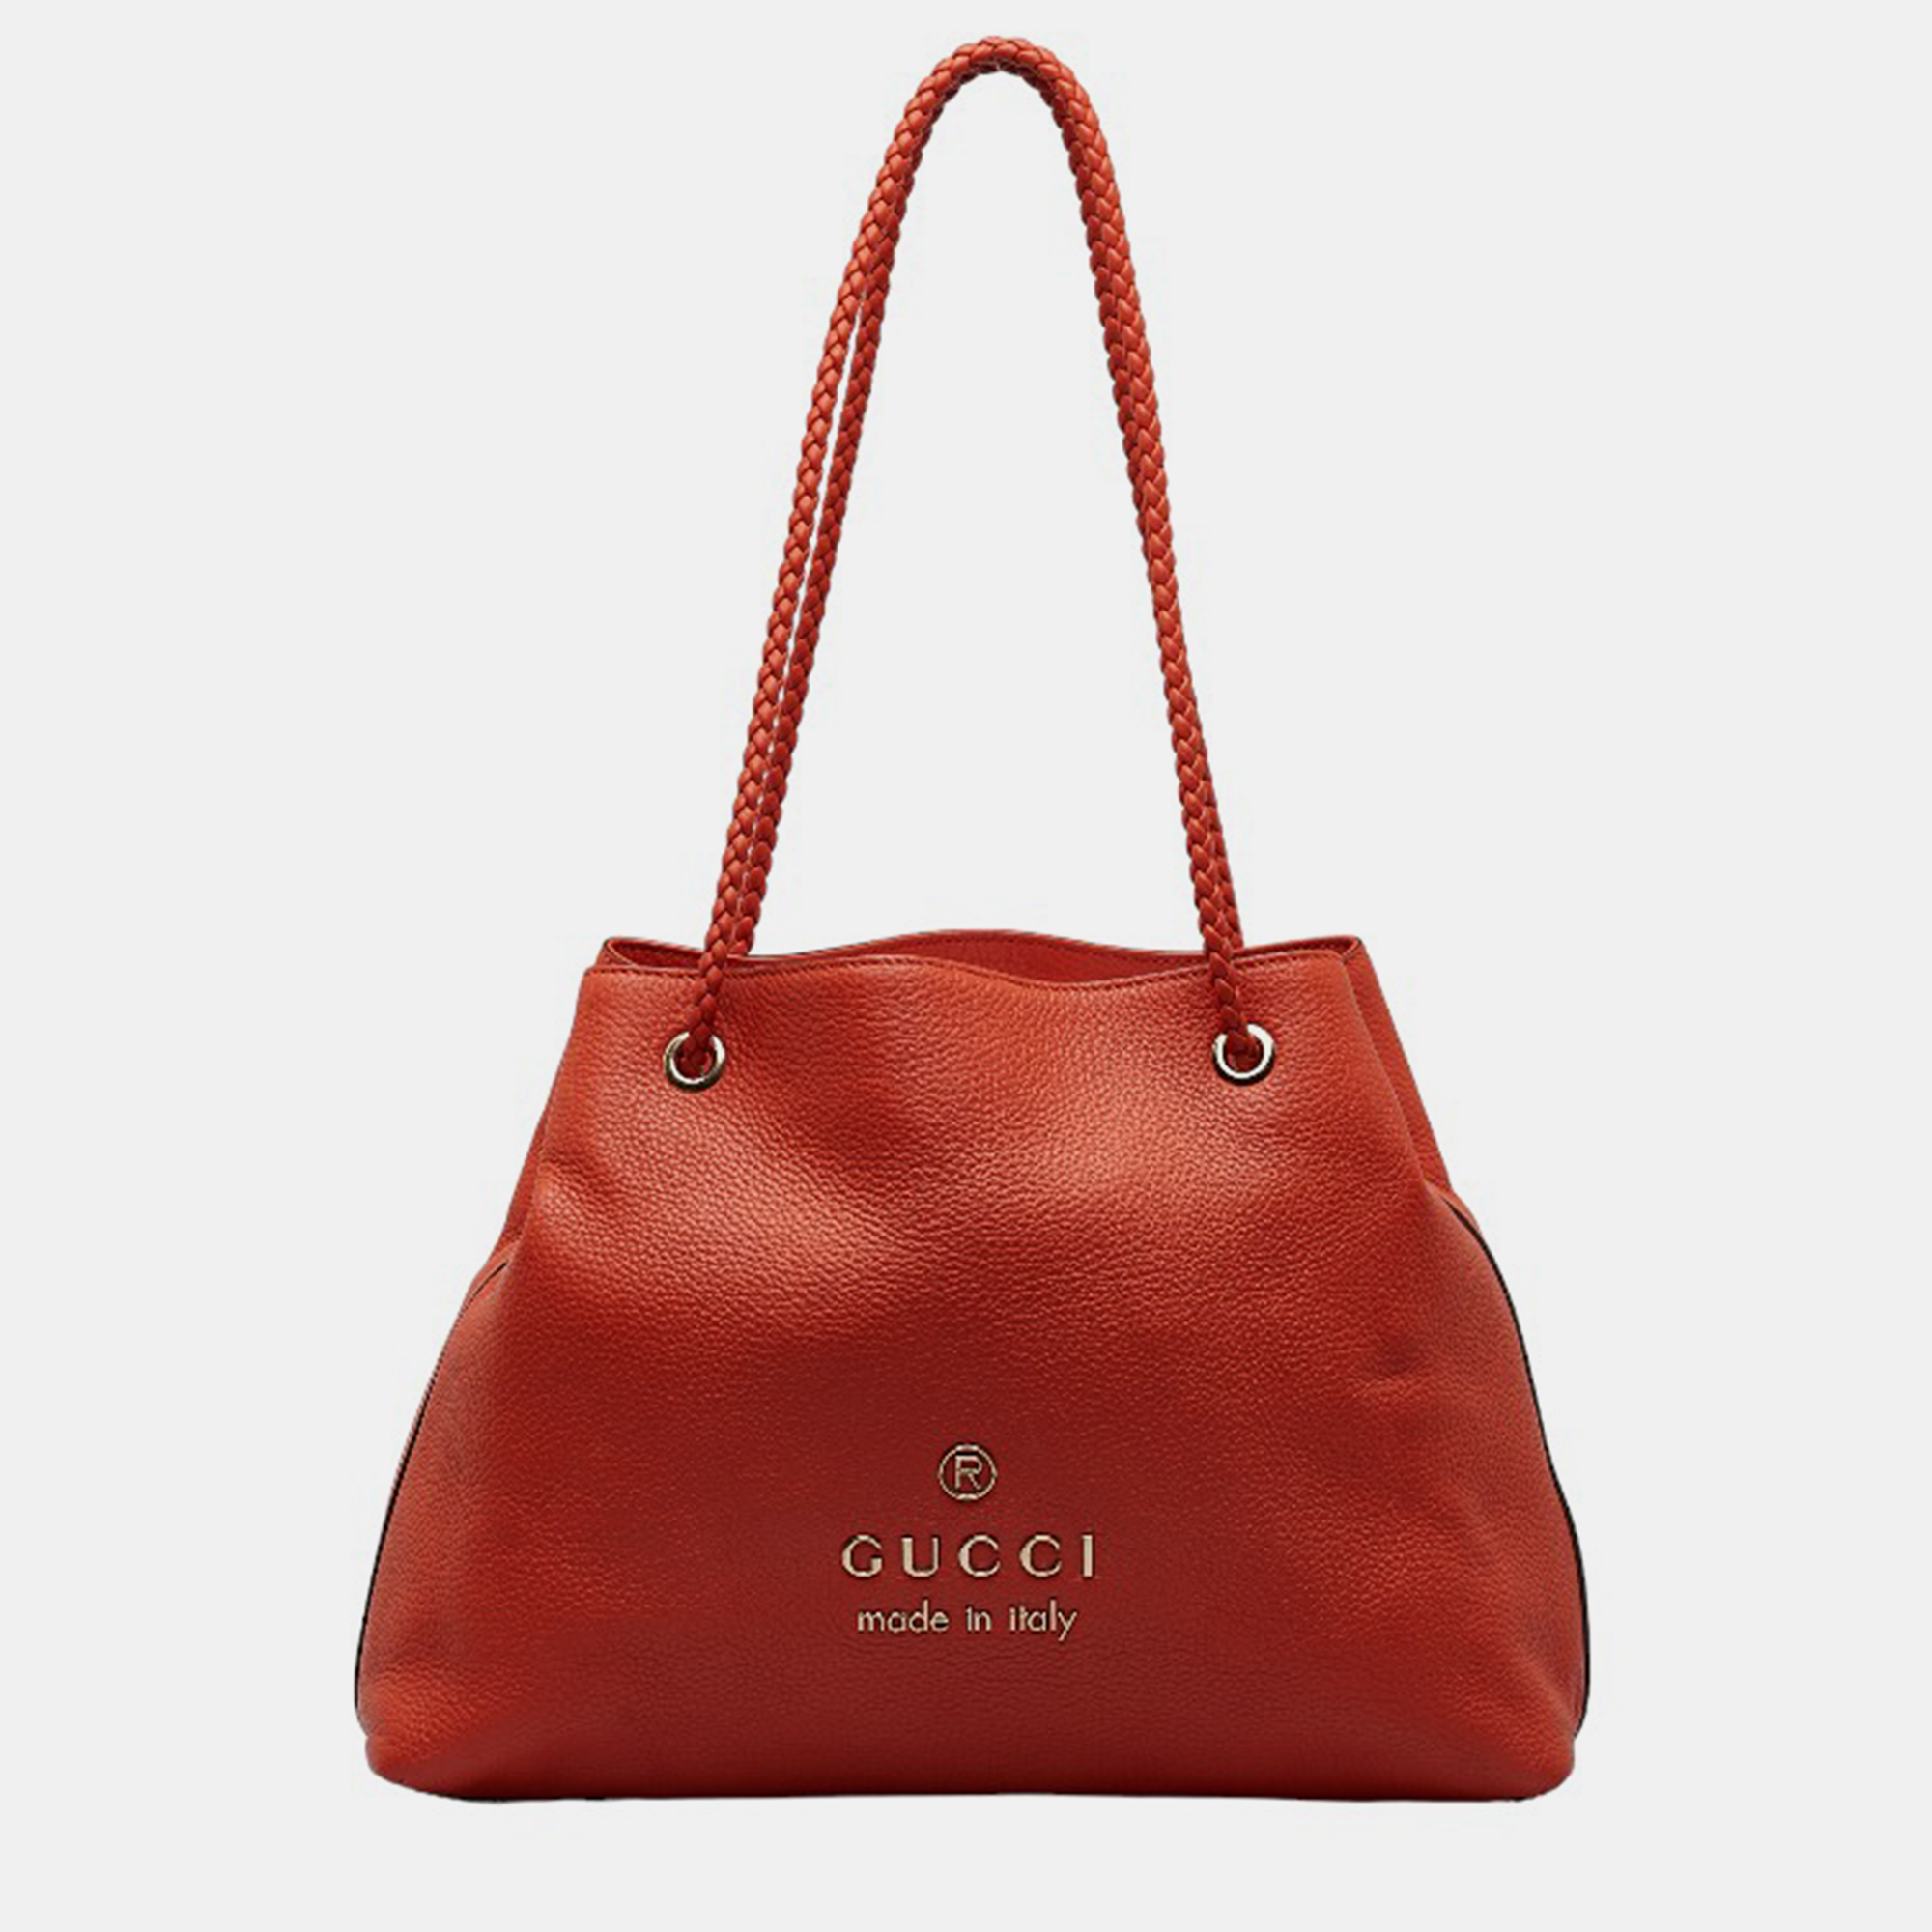 Gucci Red Leather Tote Bag